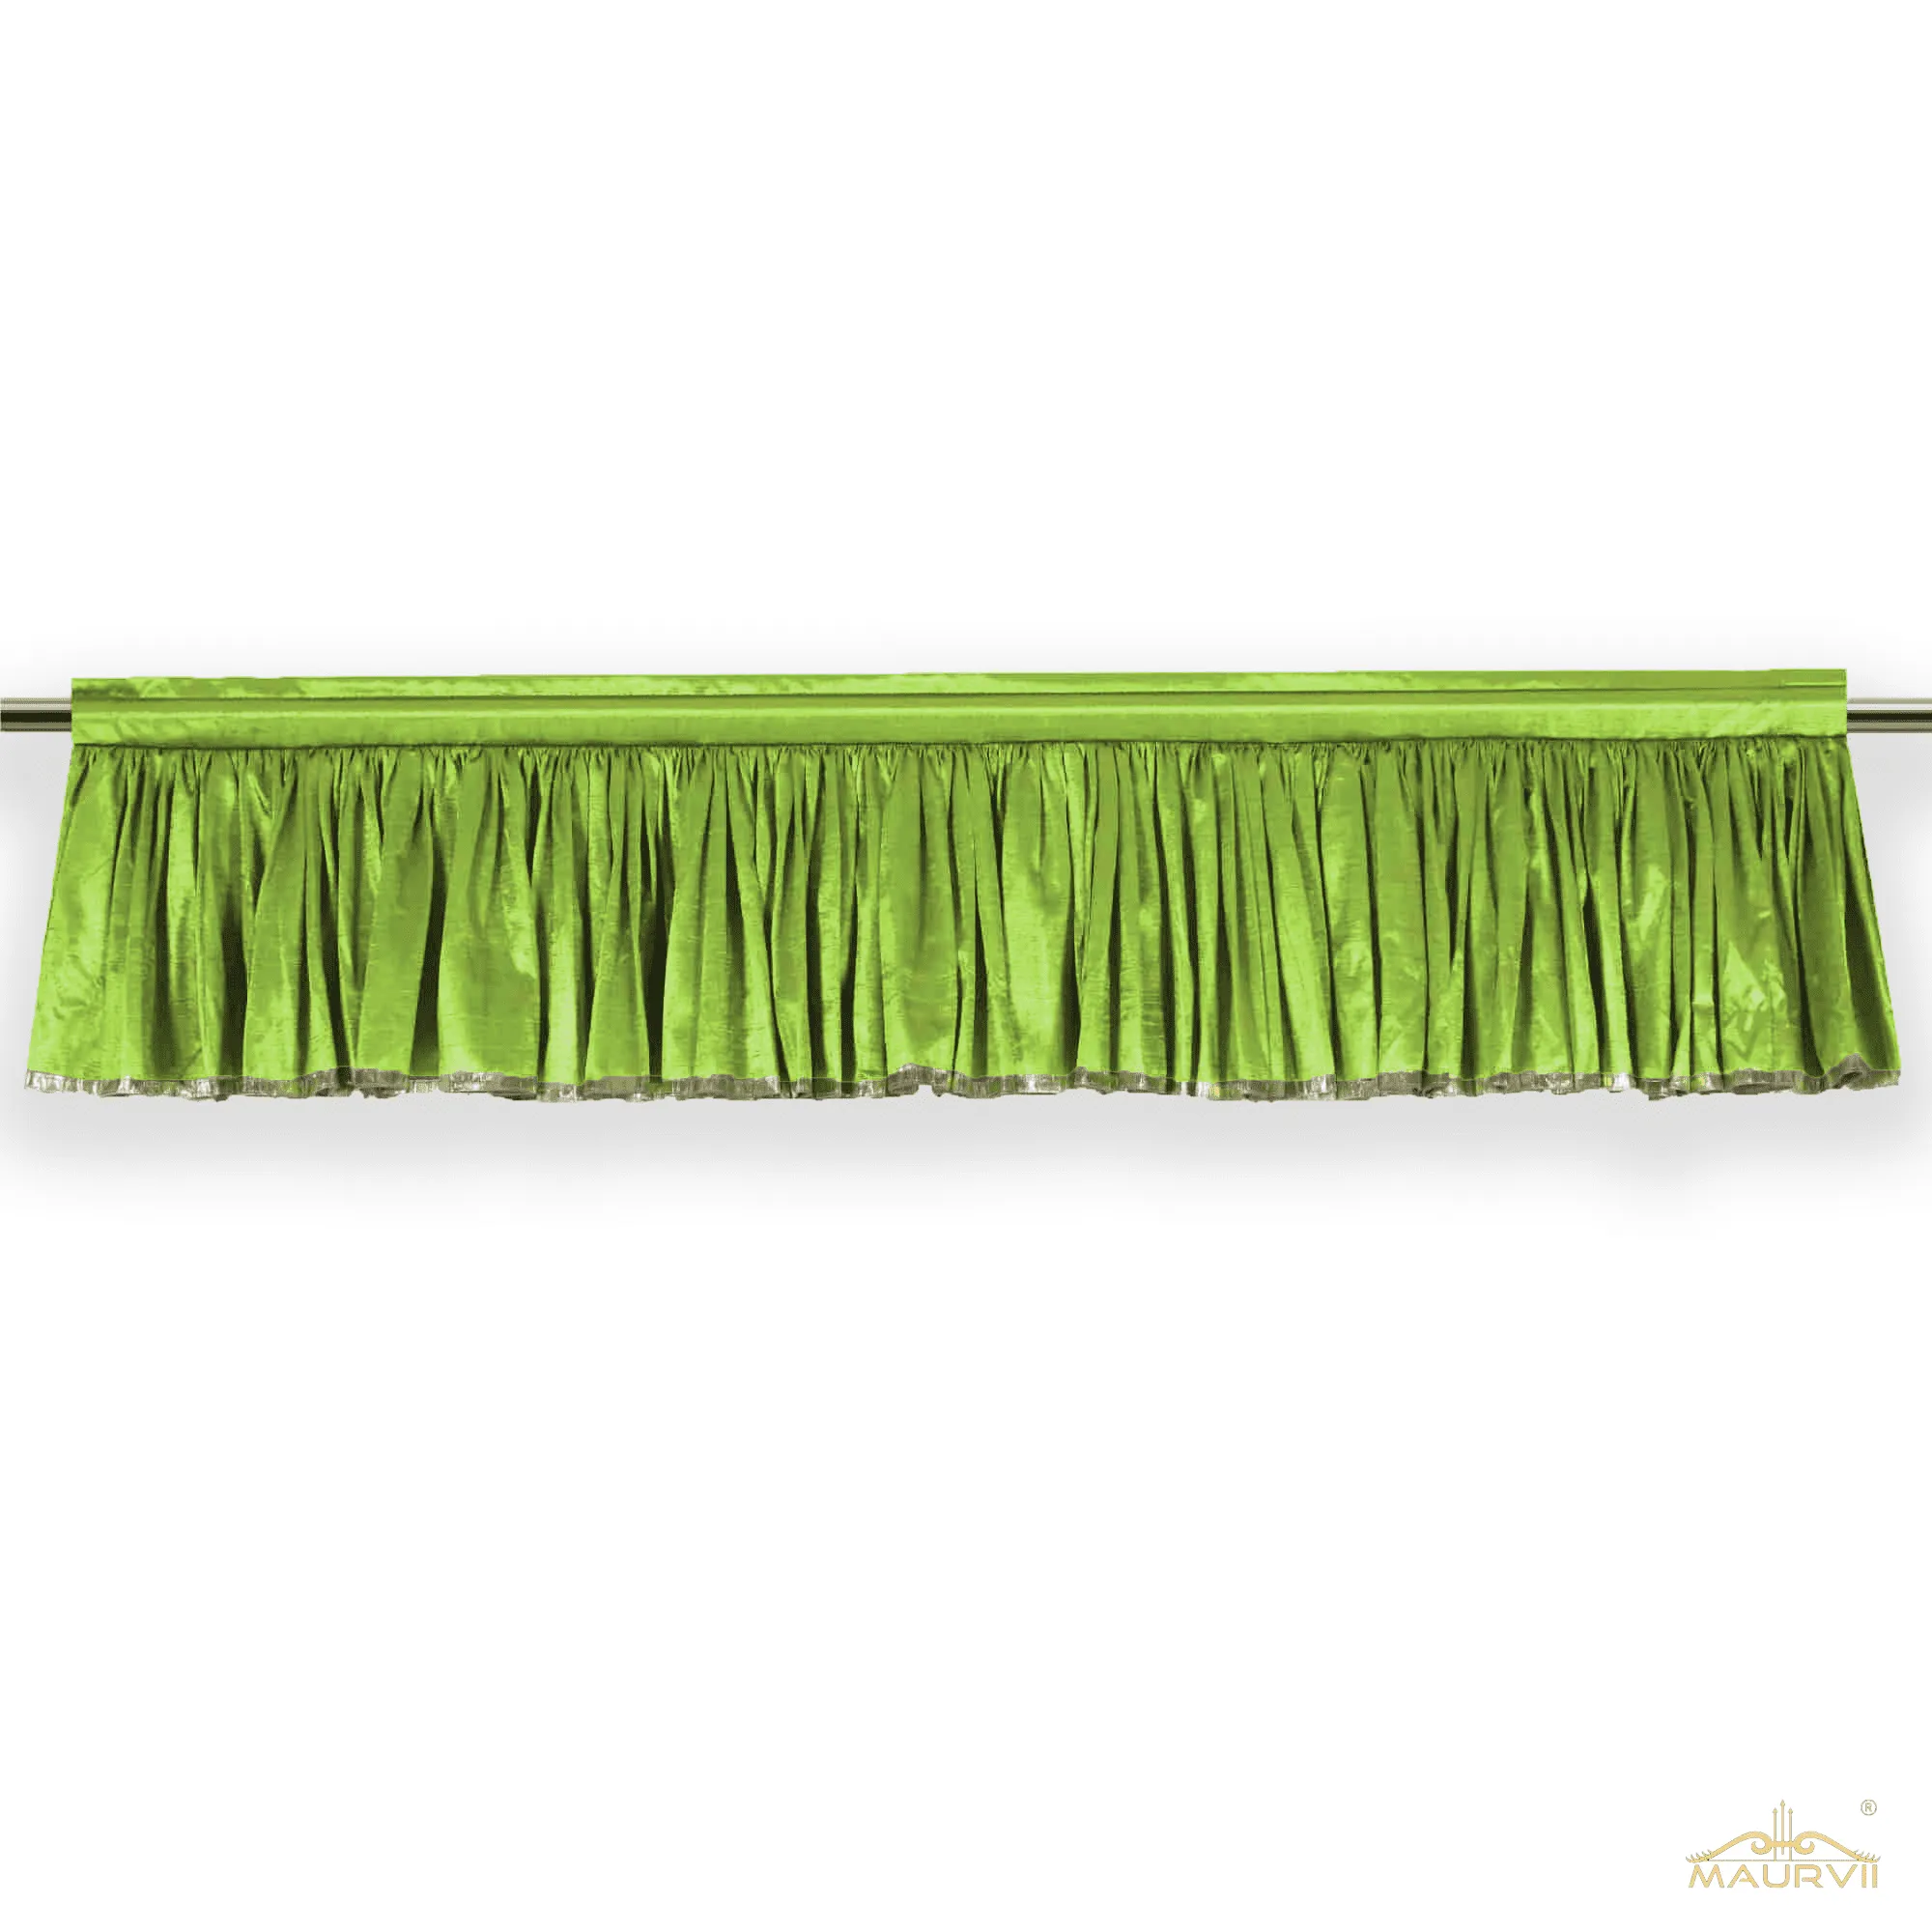 Pink Pleated Valance with golden trim at bottom